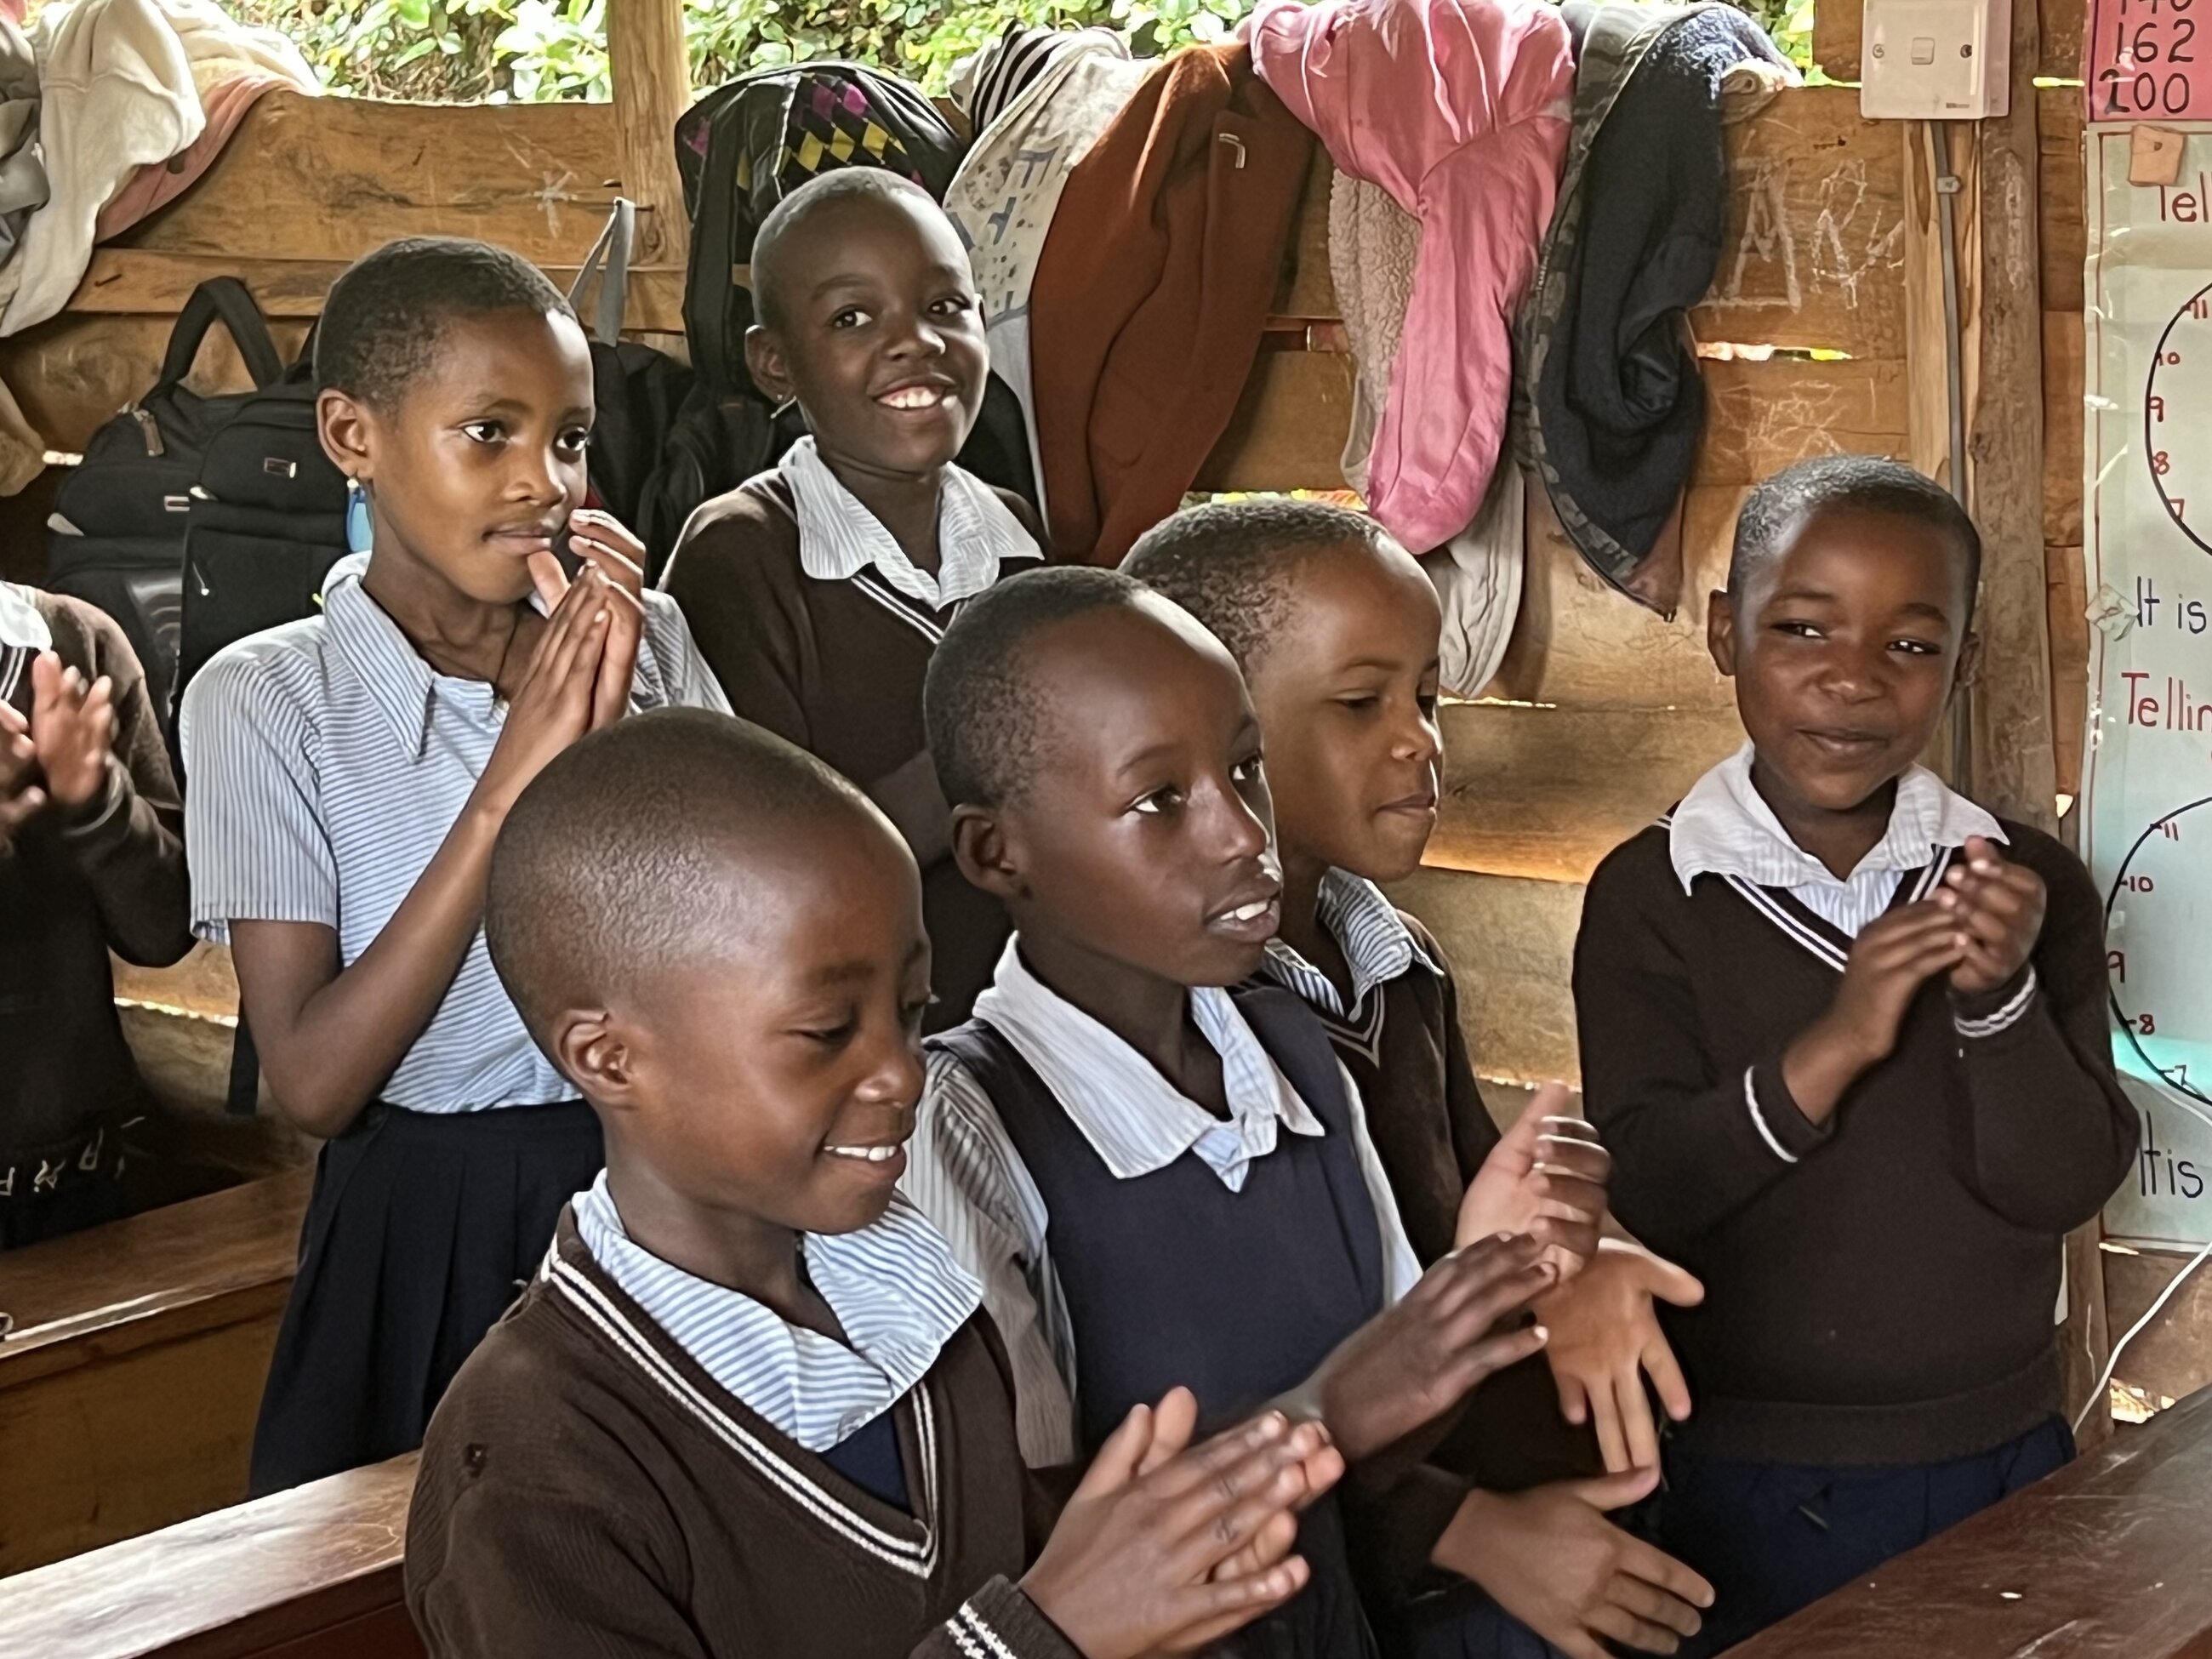 Students singing in the classroom